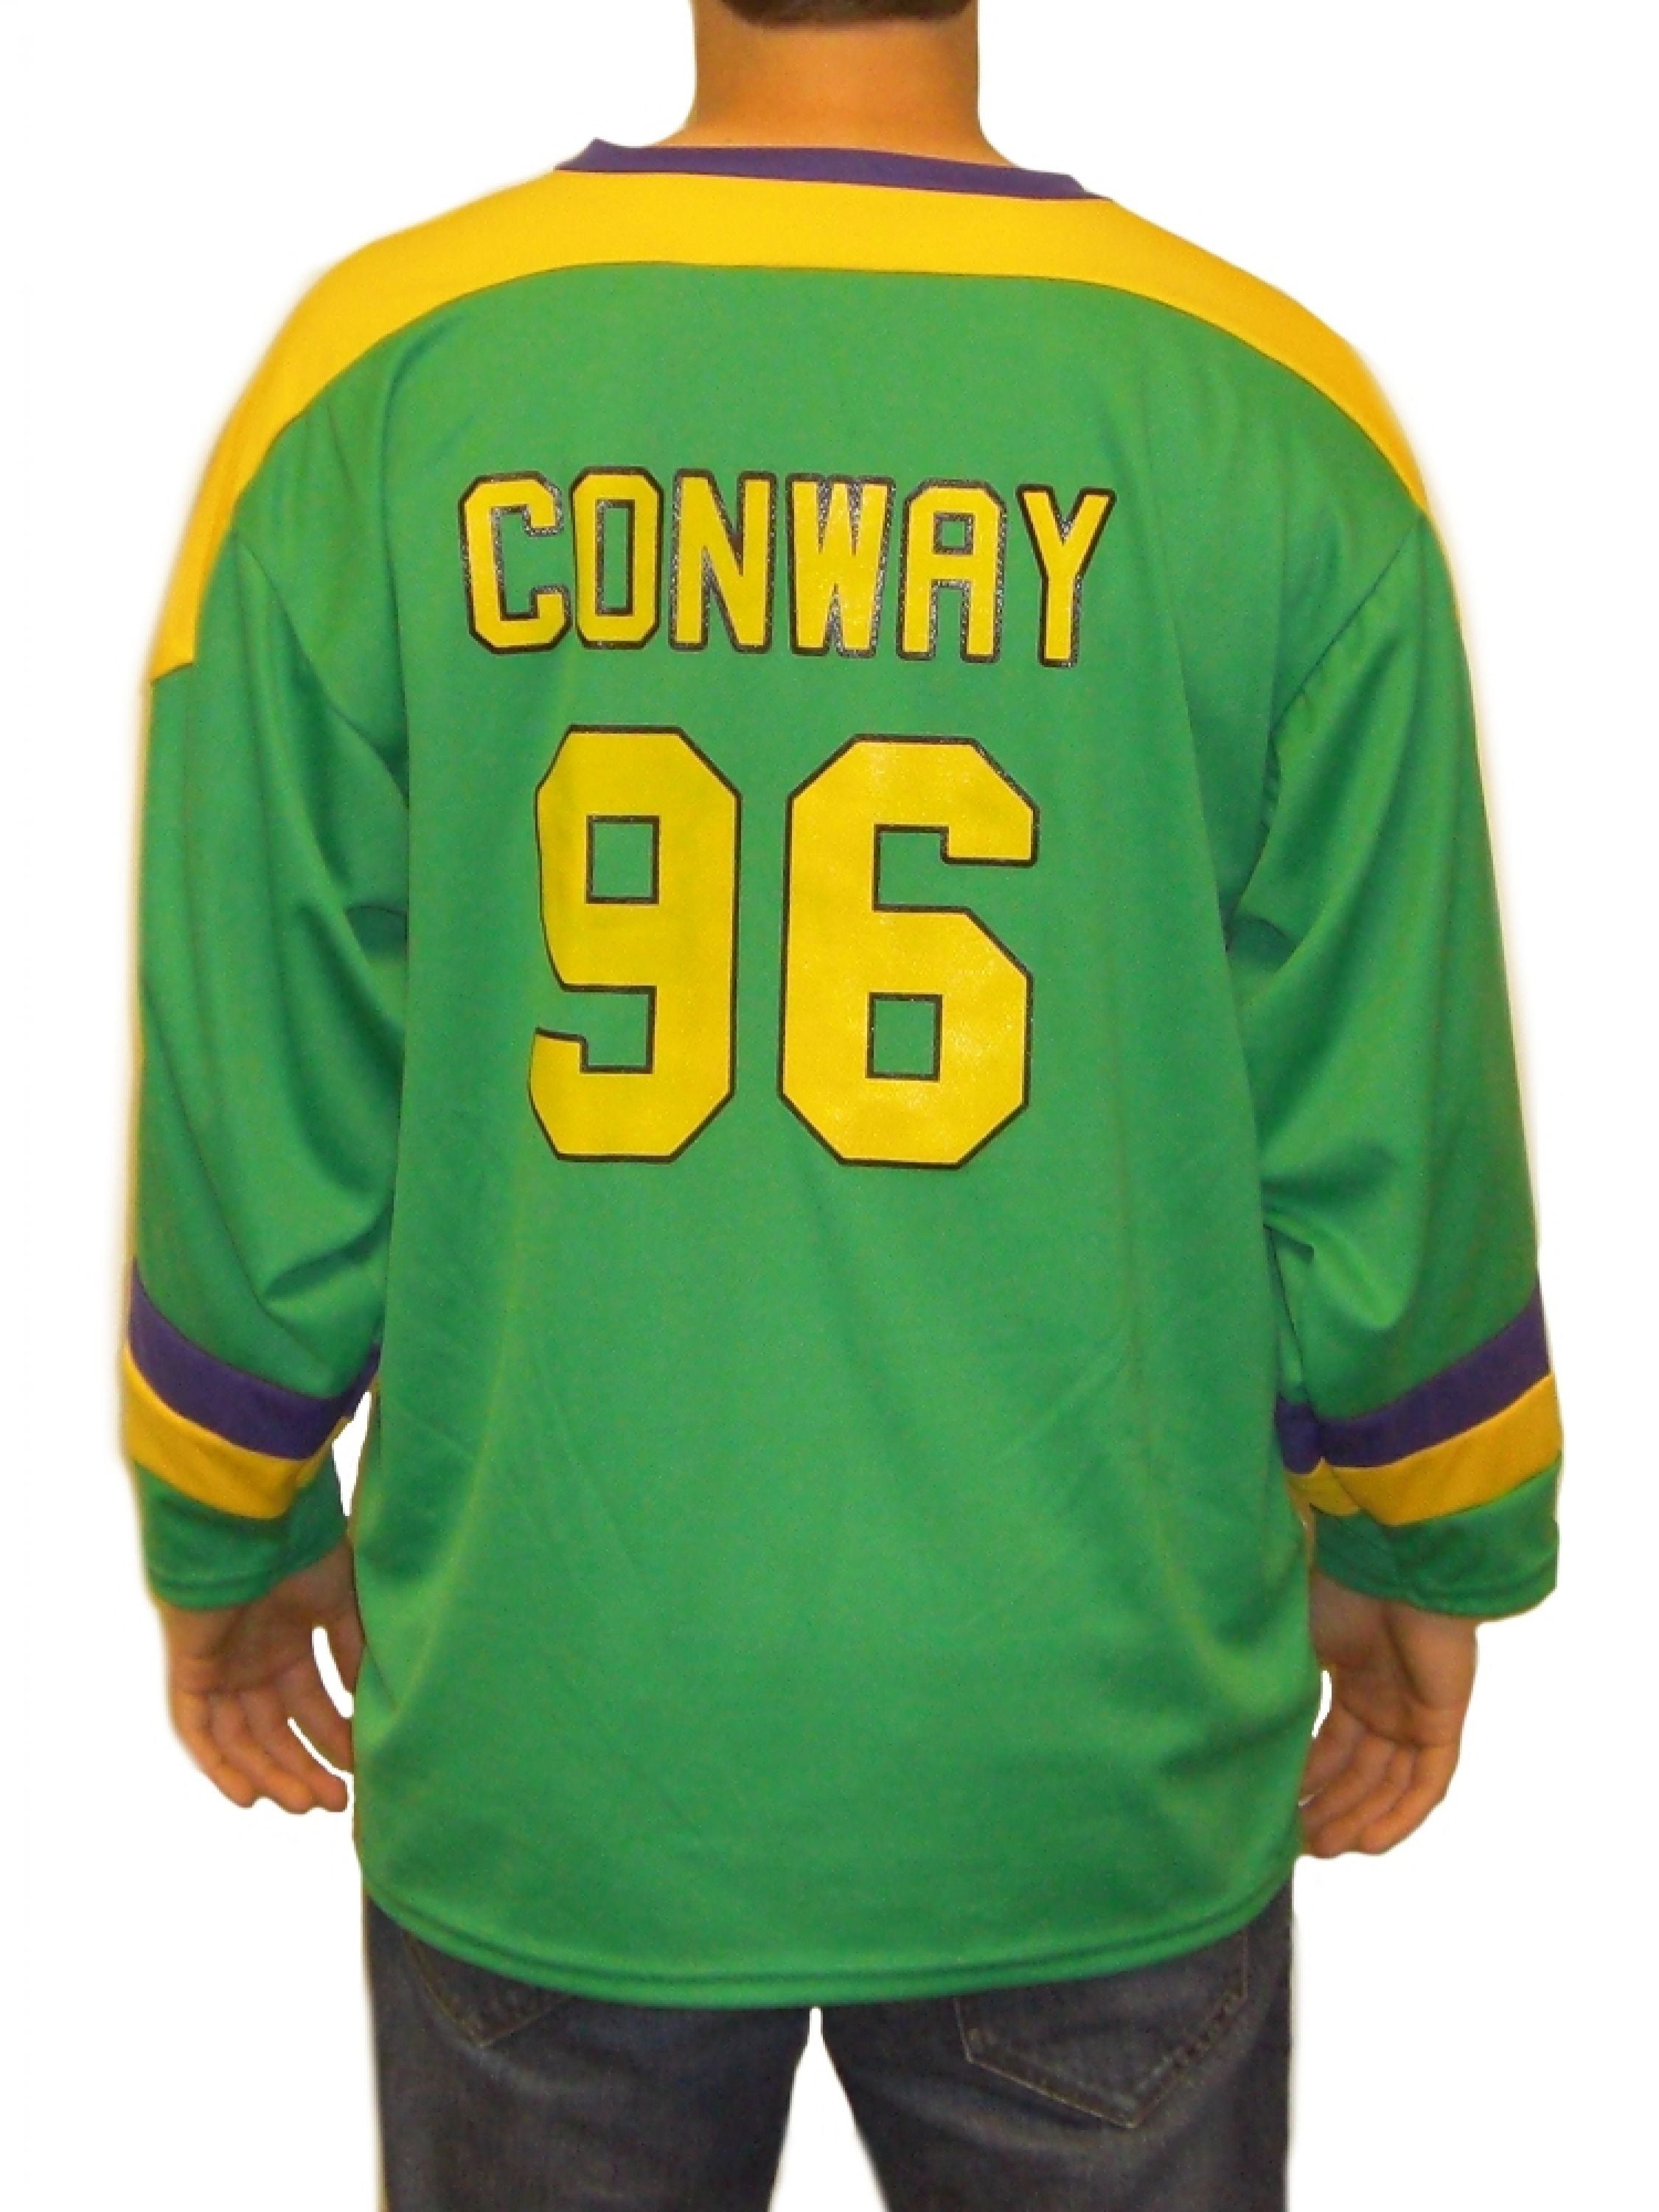 conway 96